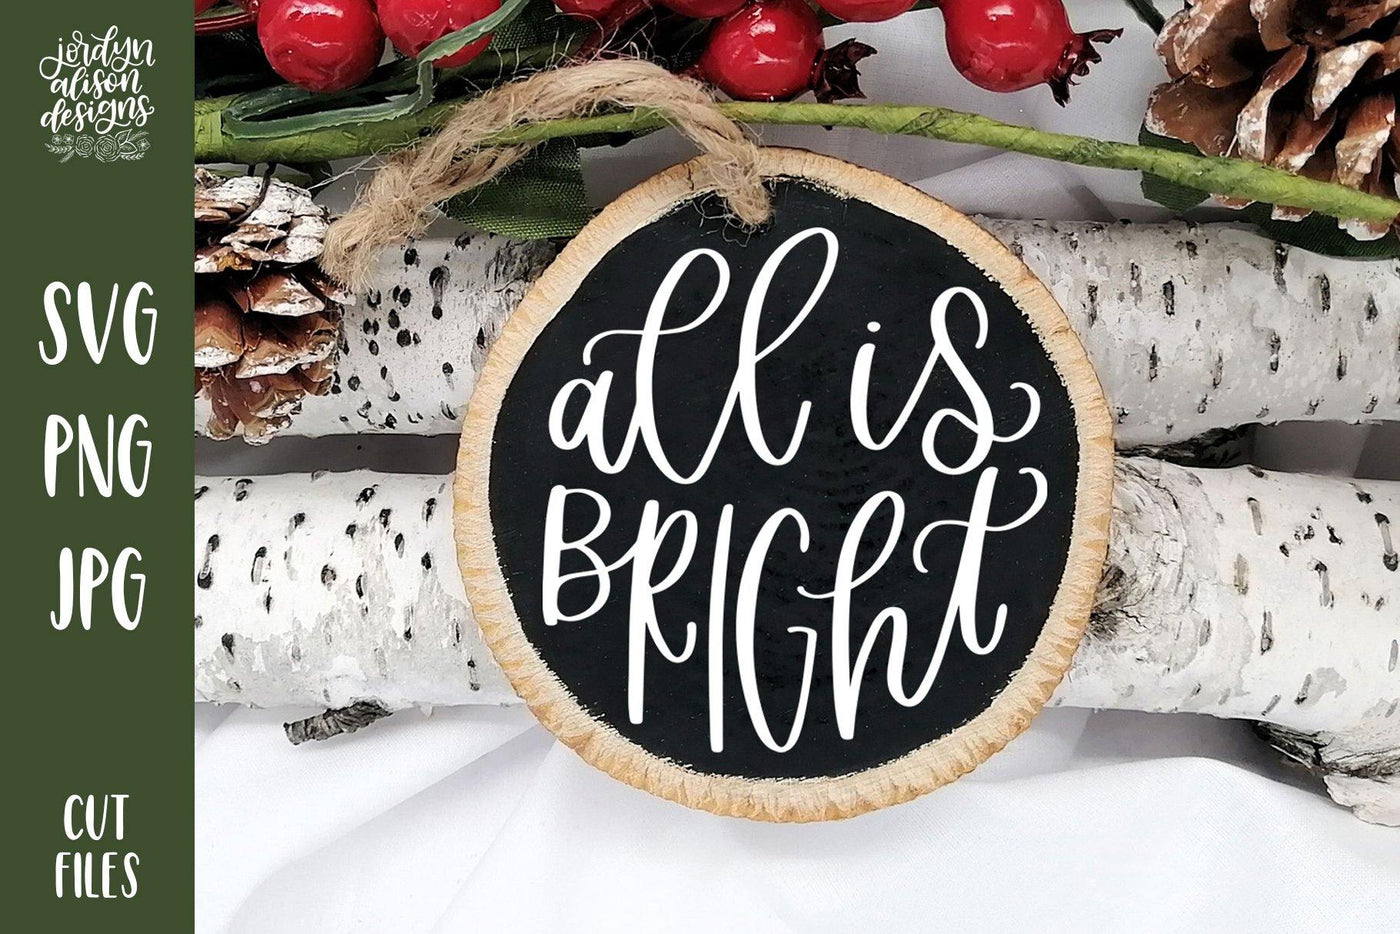 All is Bright handwritten on Round Christmas ornament